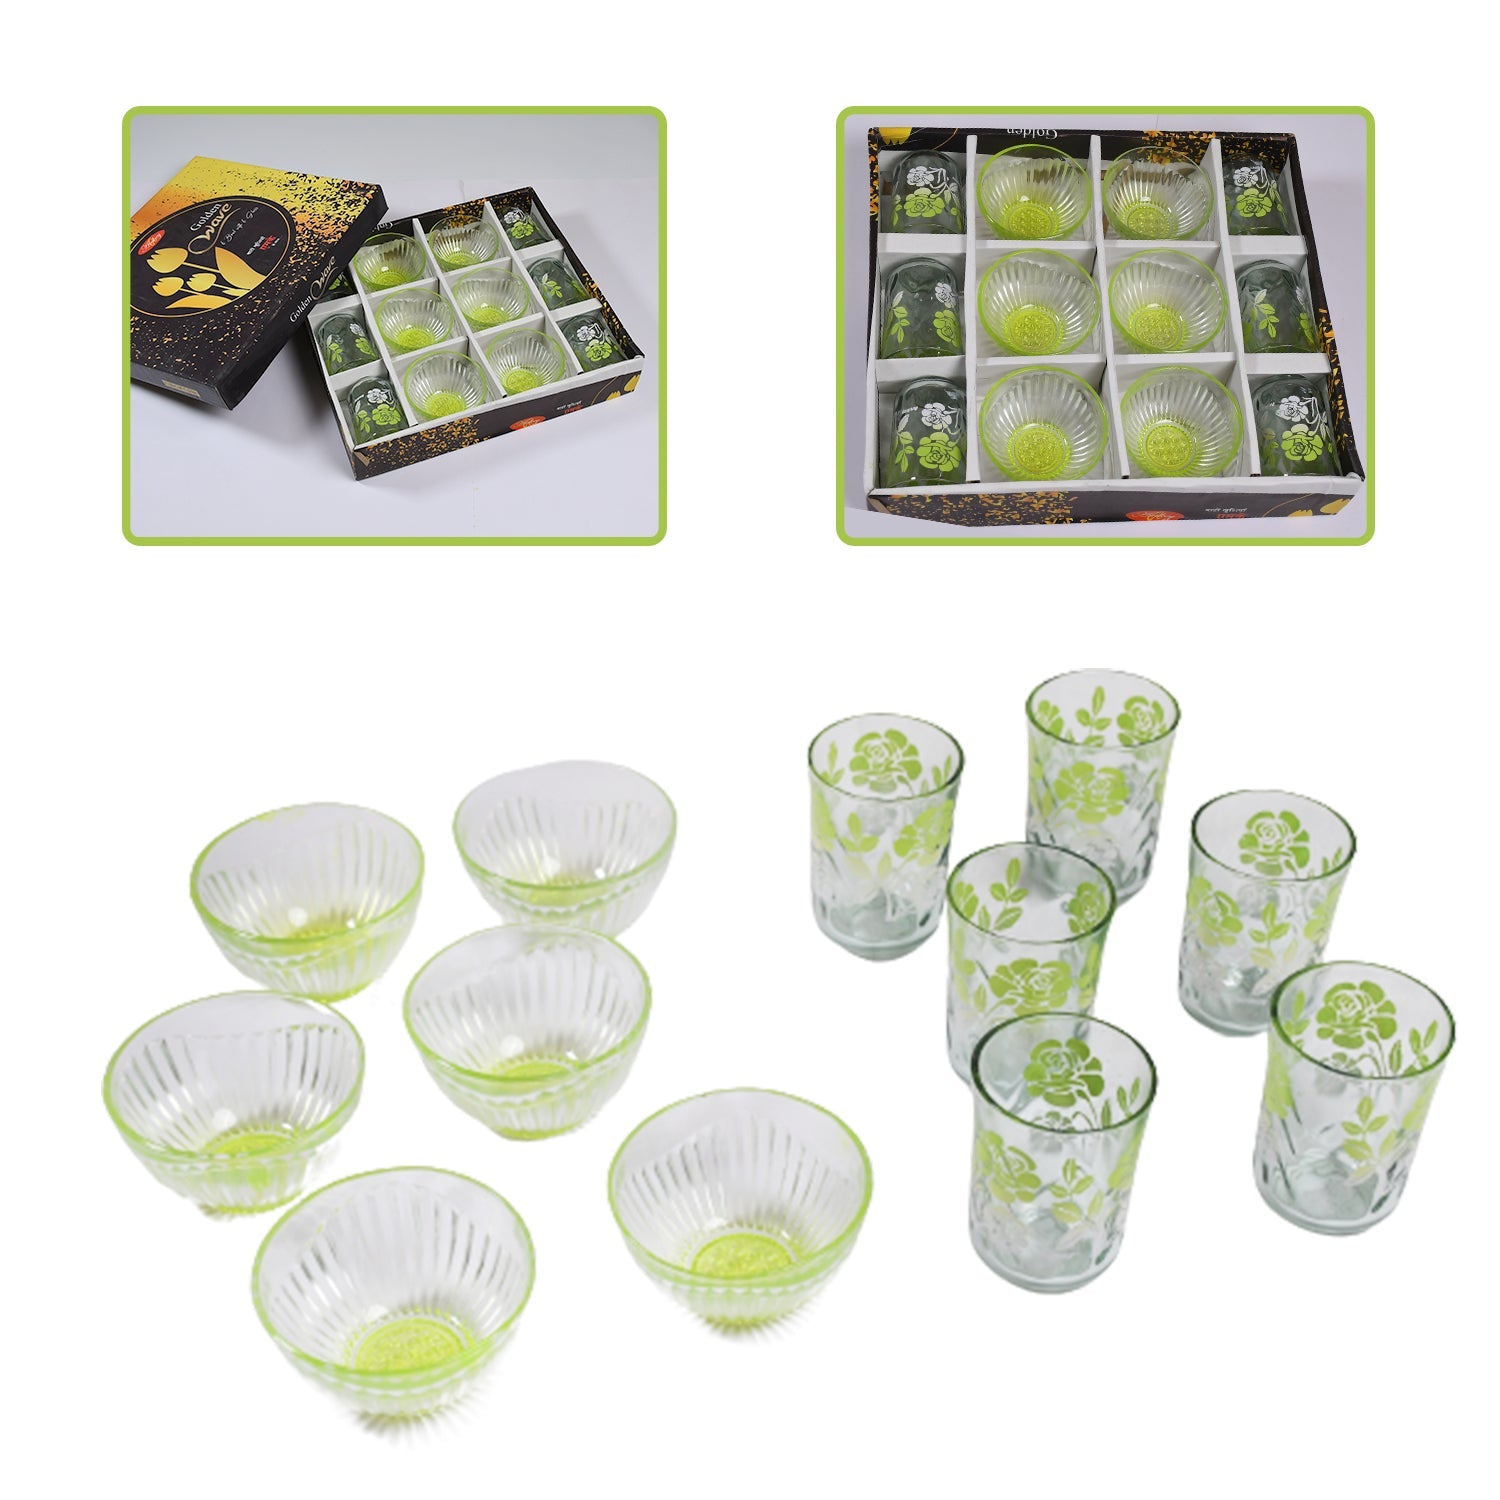 7133 Round 6 Glass With 6 Bowl Set, All Purpose Serving Set For Home & Kitchen Use 